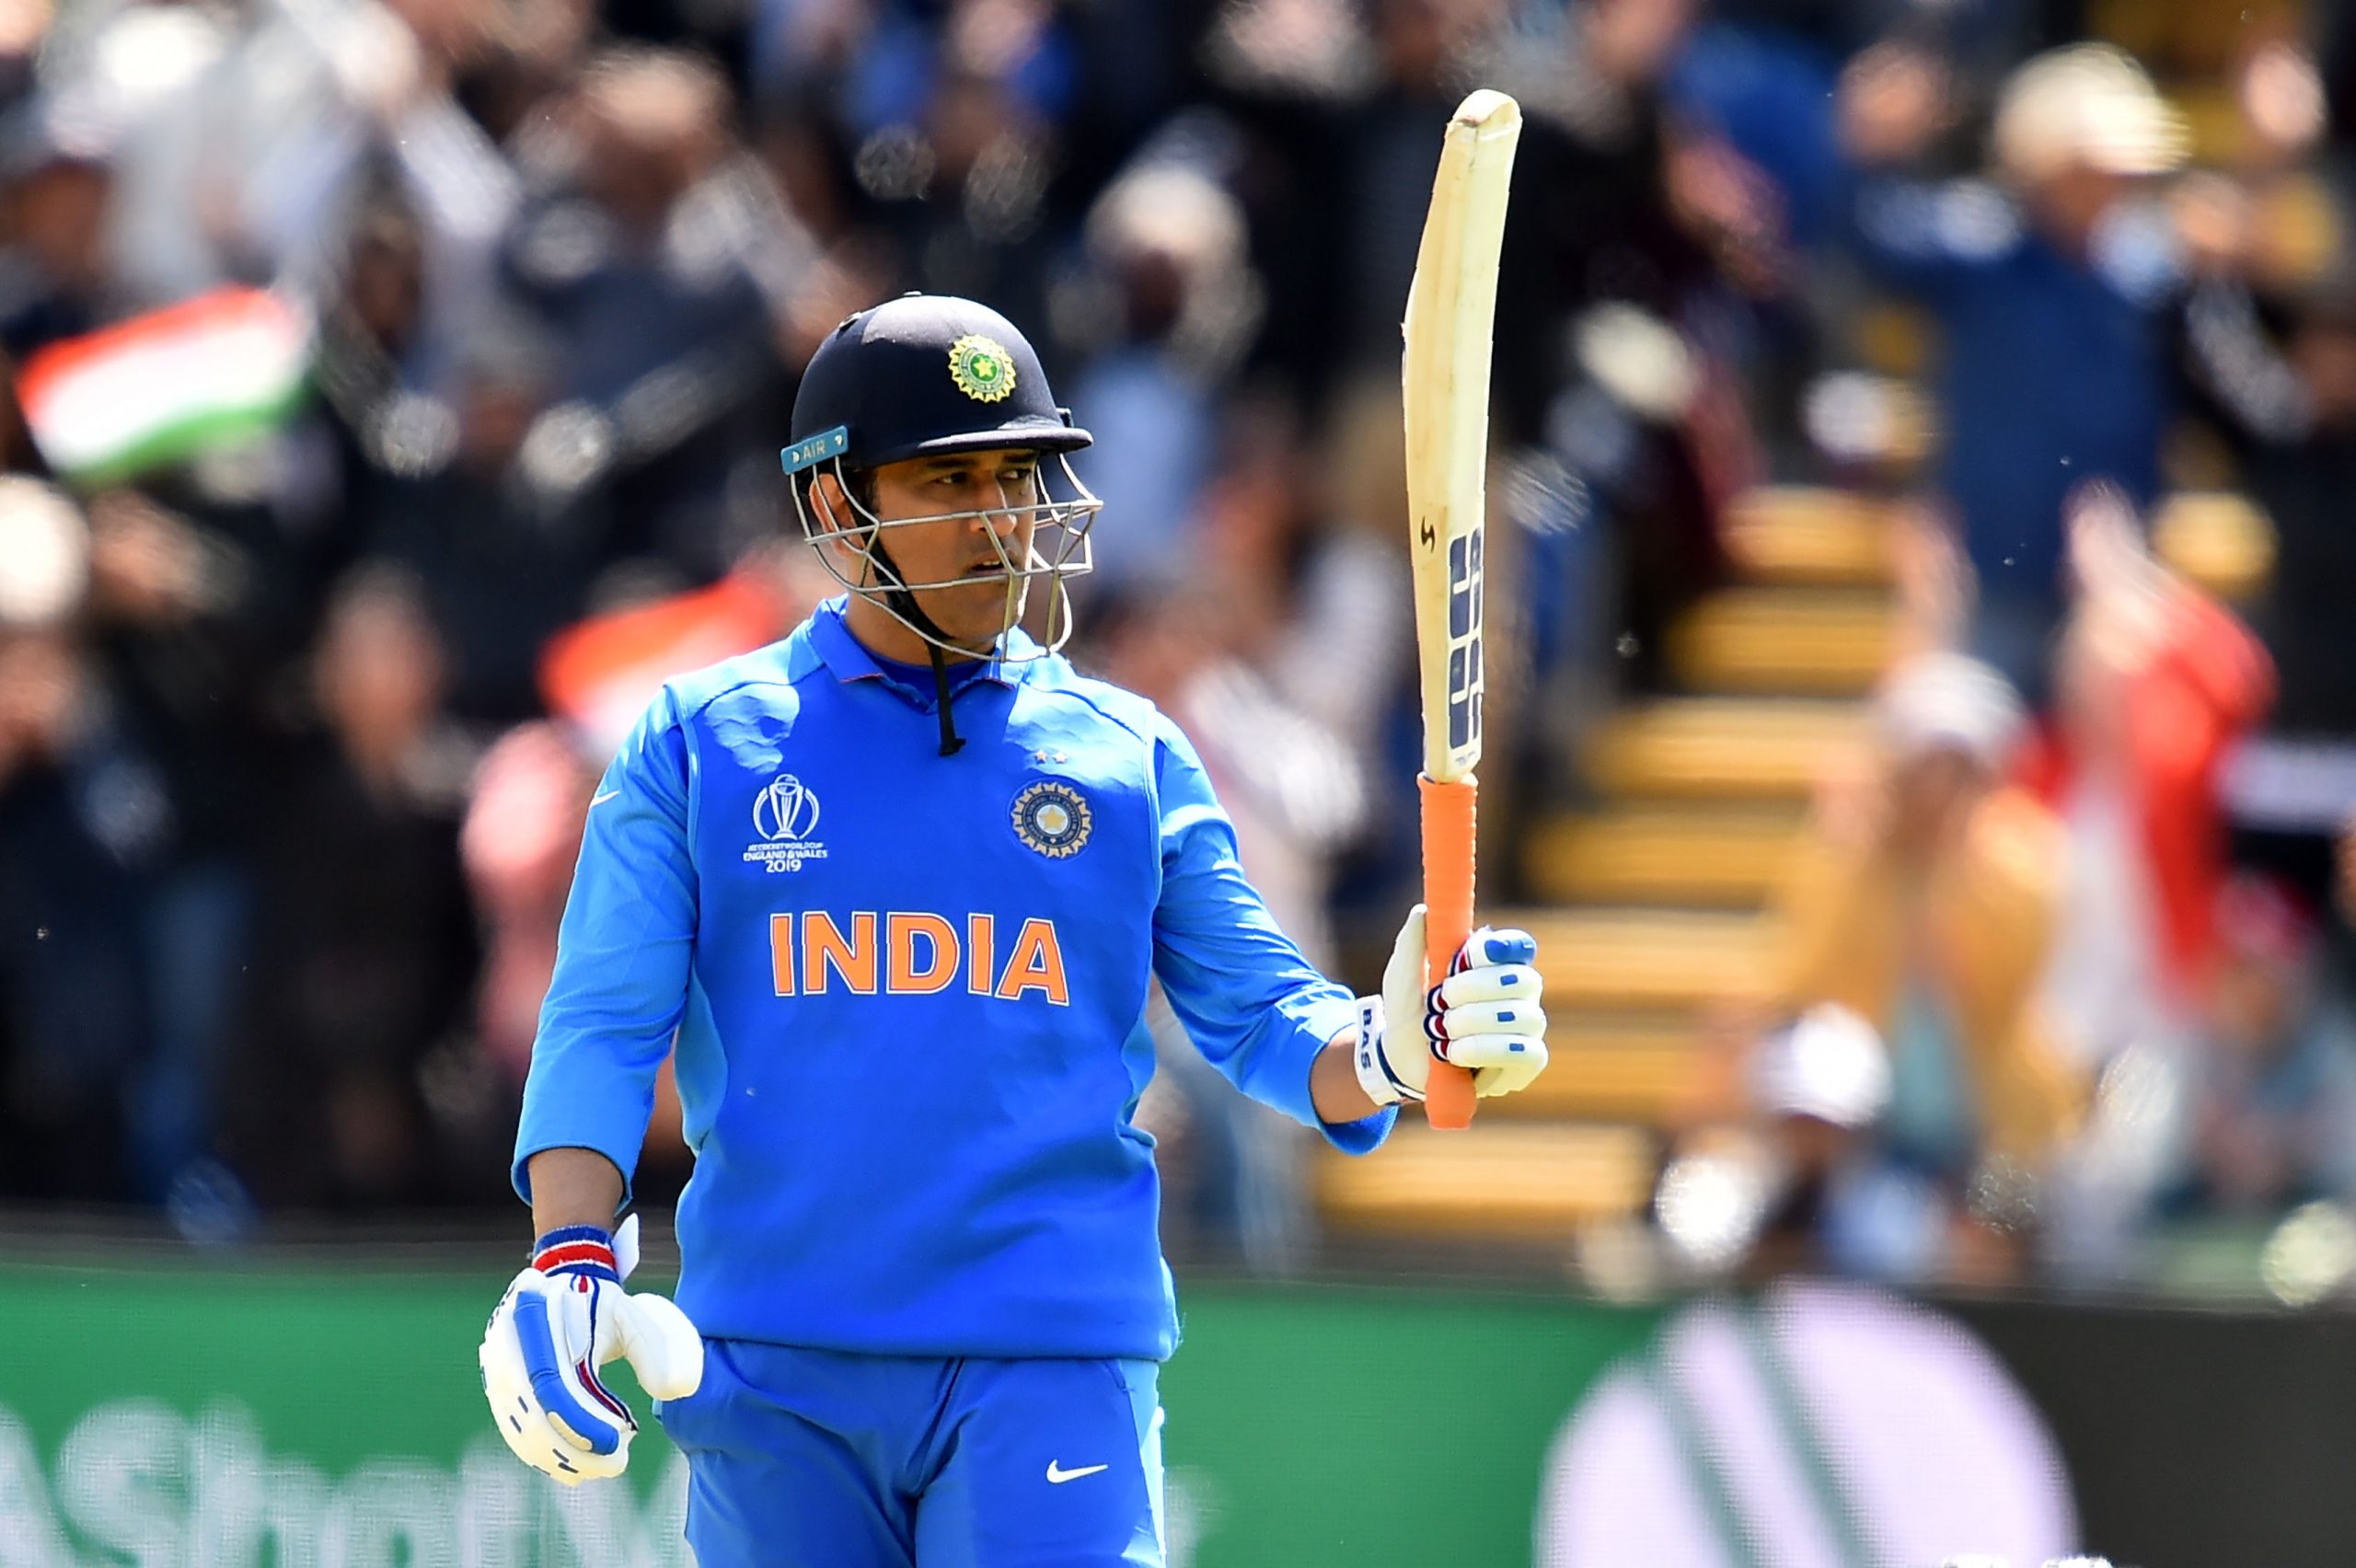 ‘From 19:29 hrs…’: MS Dhoni announces retirement from international cricket